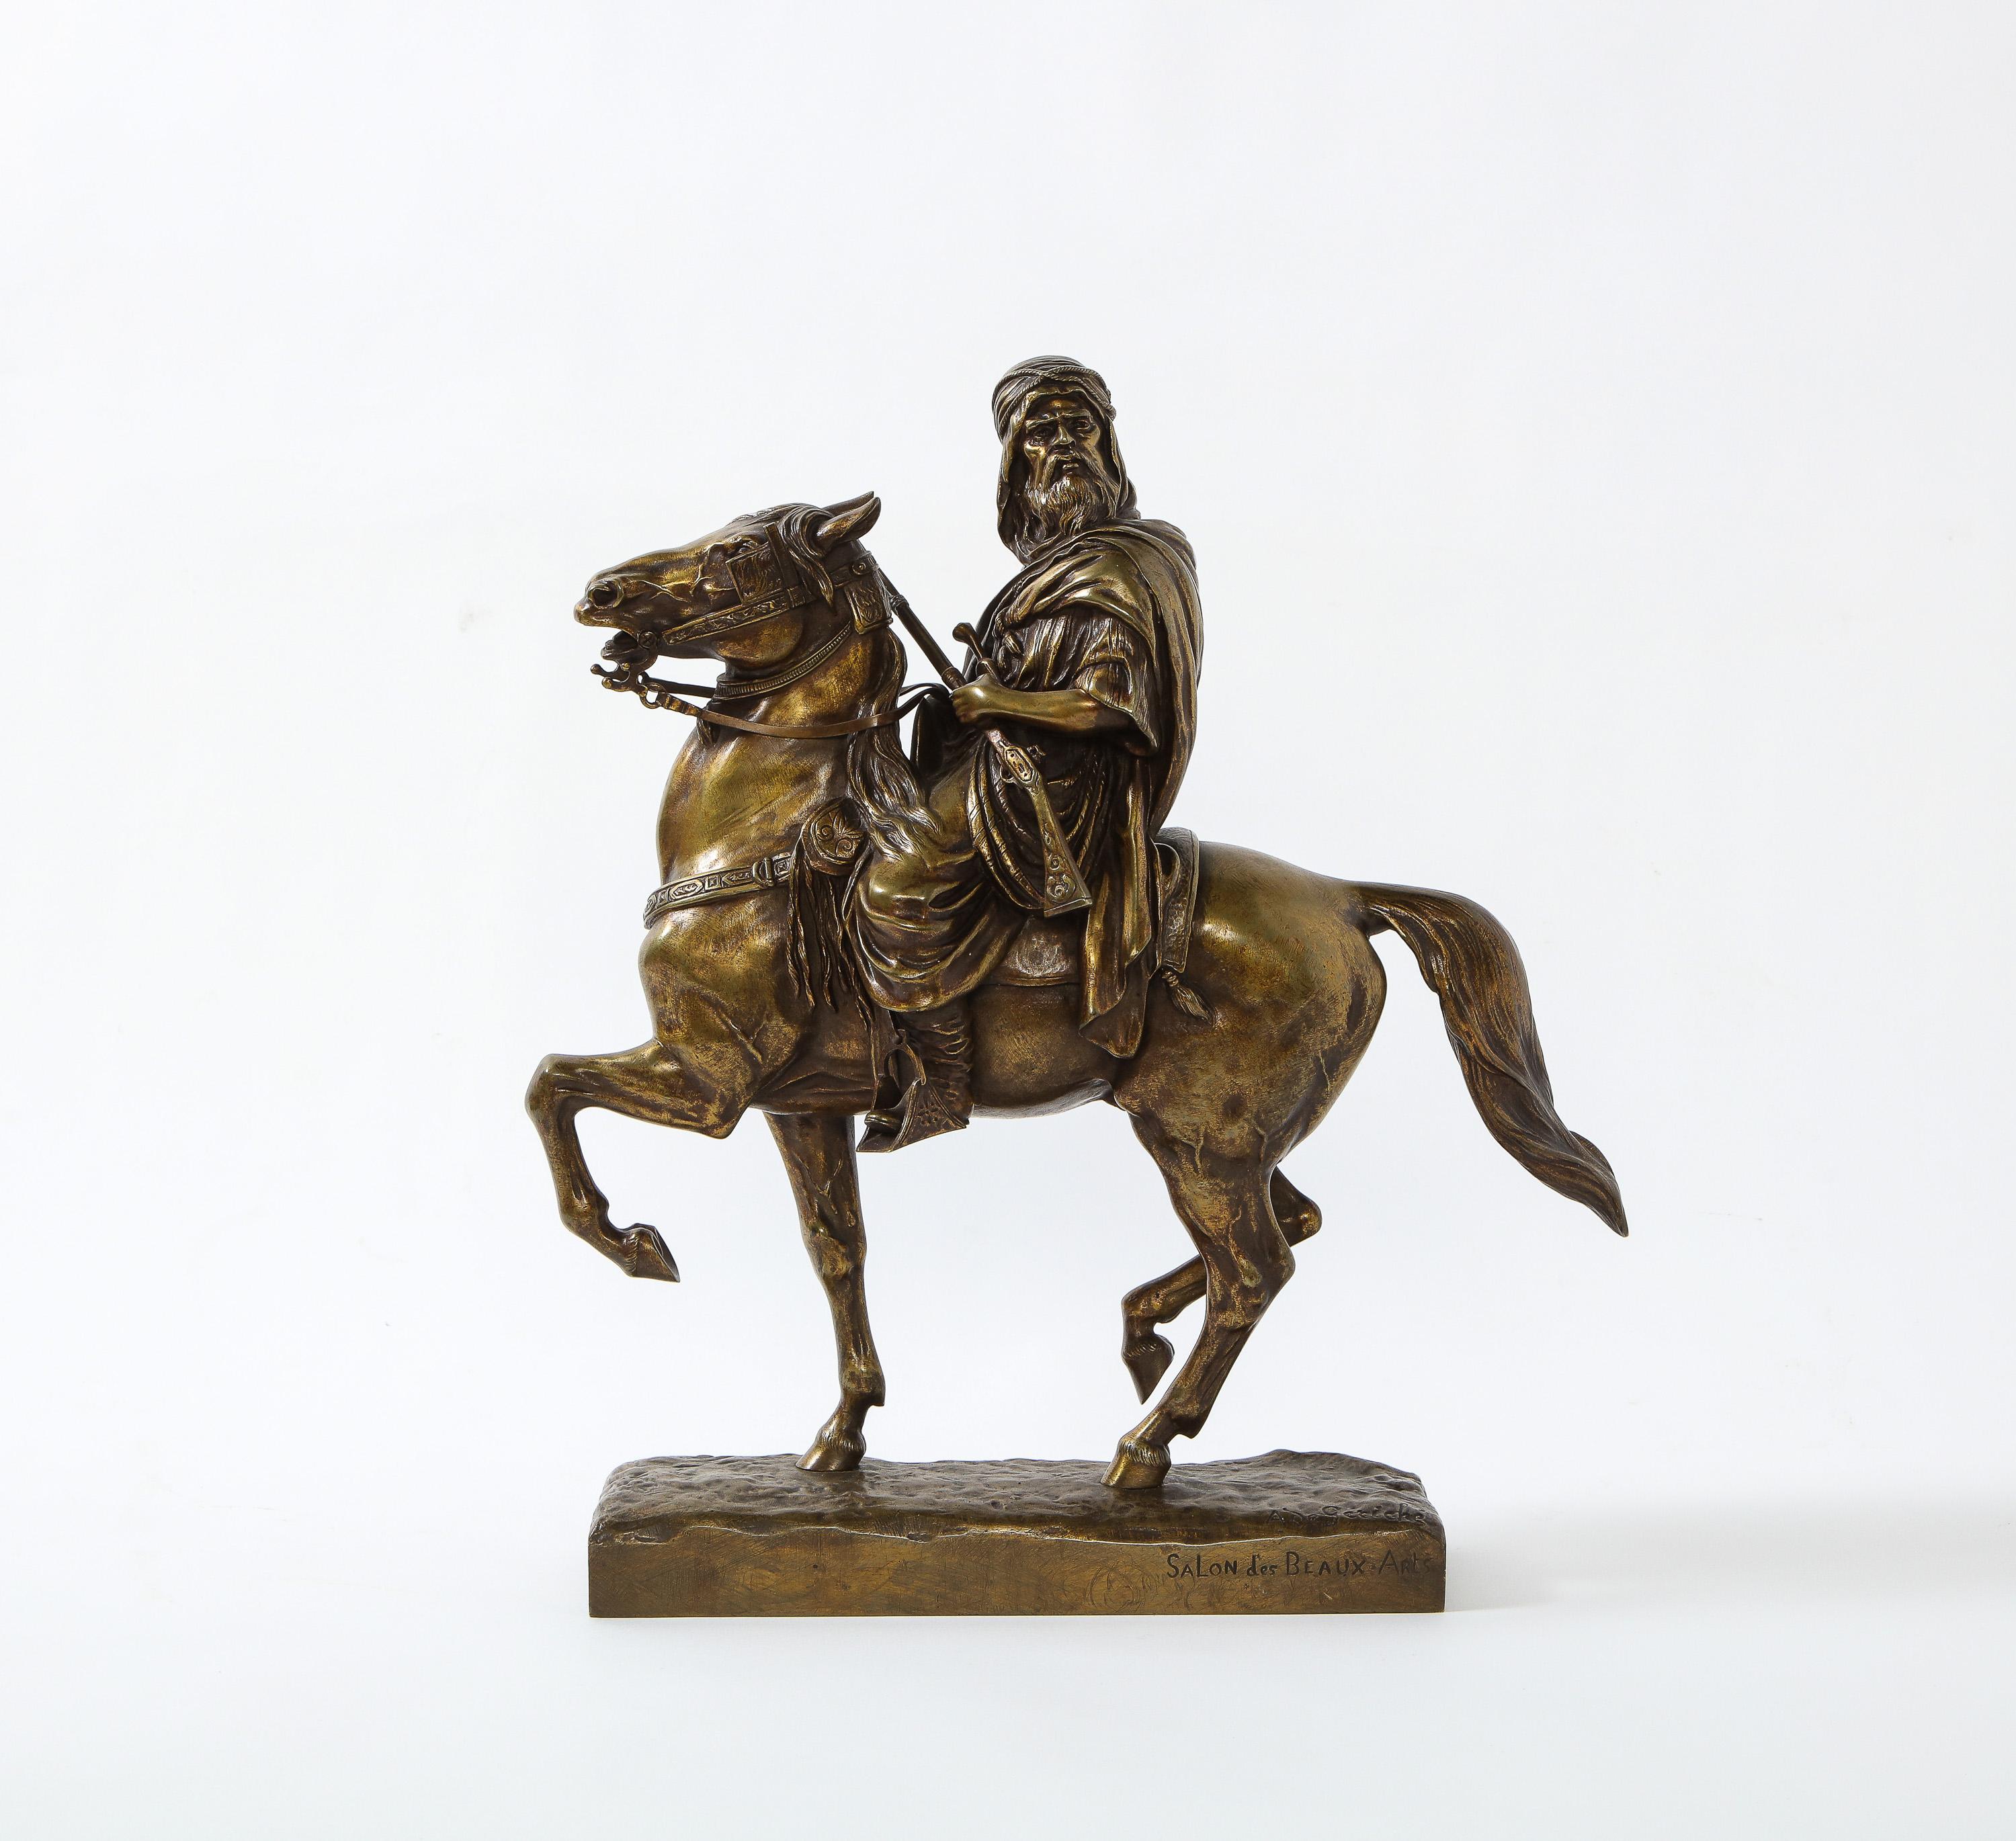 A French gilt bronze sculpture of An Arab Riding A Horse, by A. De Gericke, and exhibited at the Salon Des Beaux Arts in Paris, 19th Ccntury.

Very nice quality sculpture of a horseman, and in very good condition. Ready to place.

Measures: